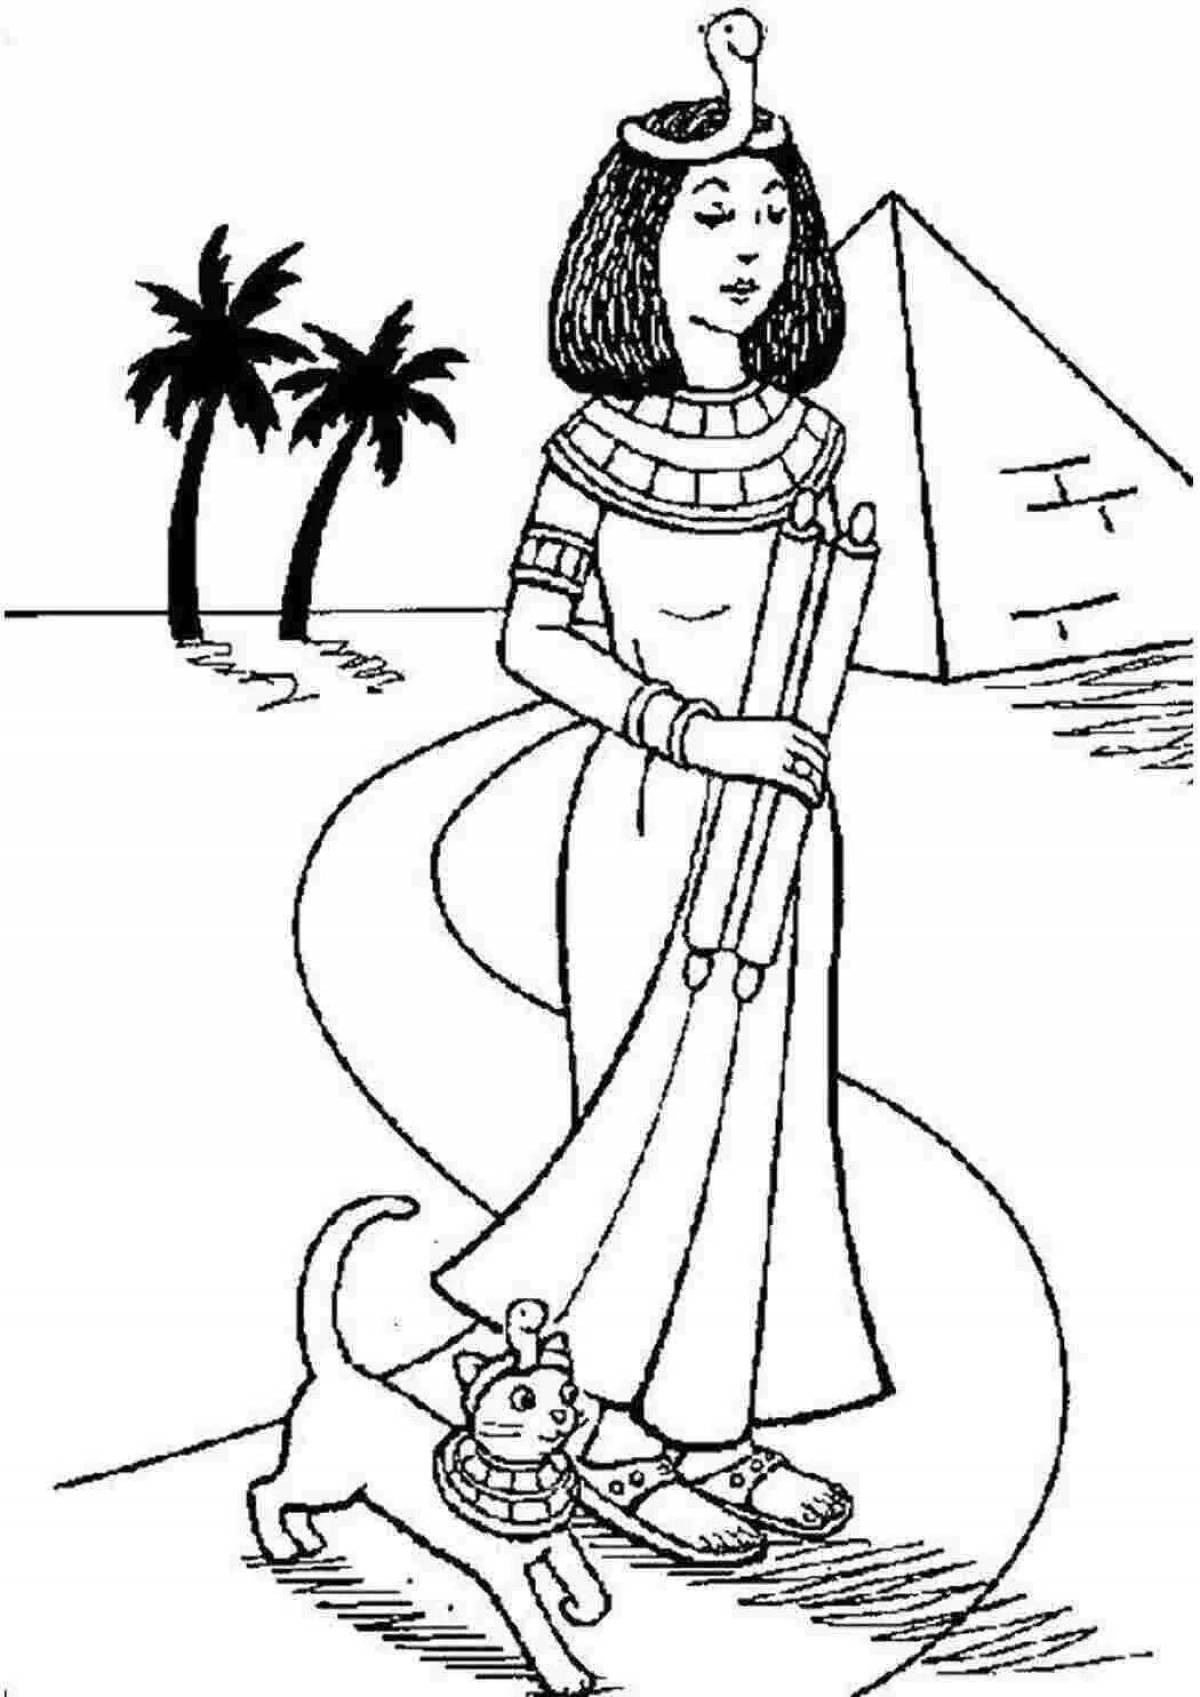 Exotic ancient egypt coloring book for kids